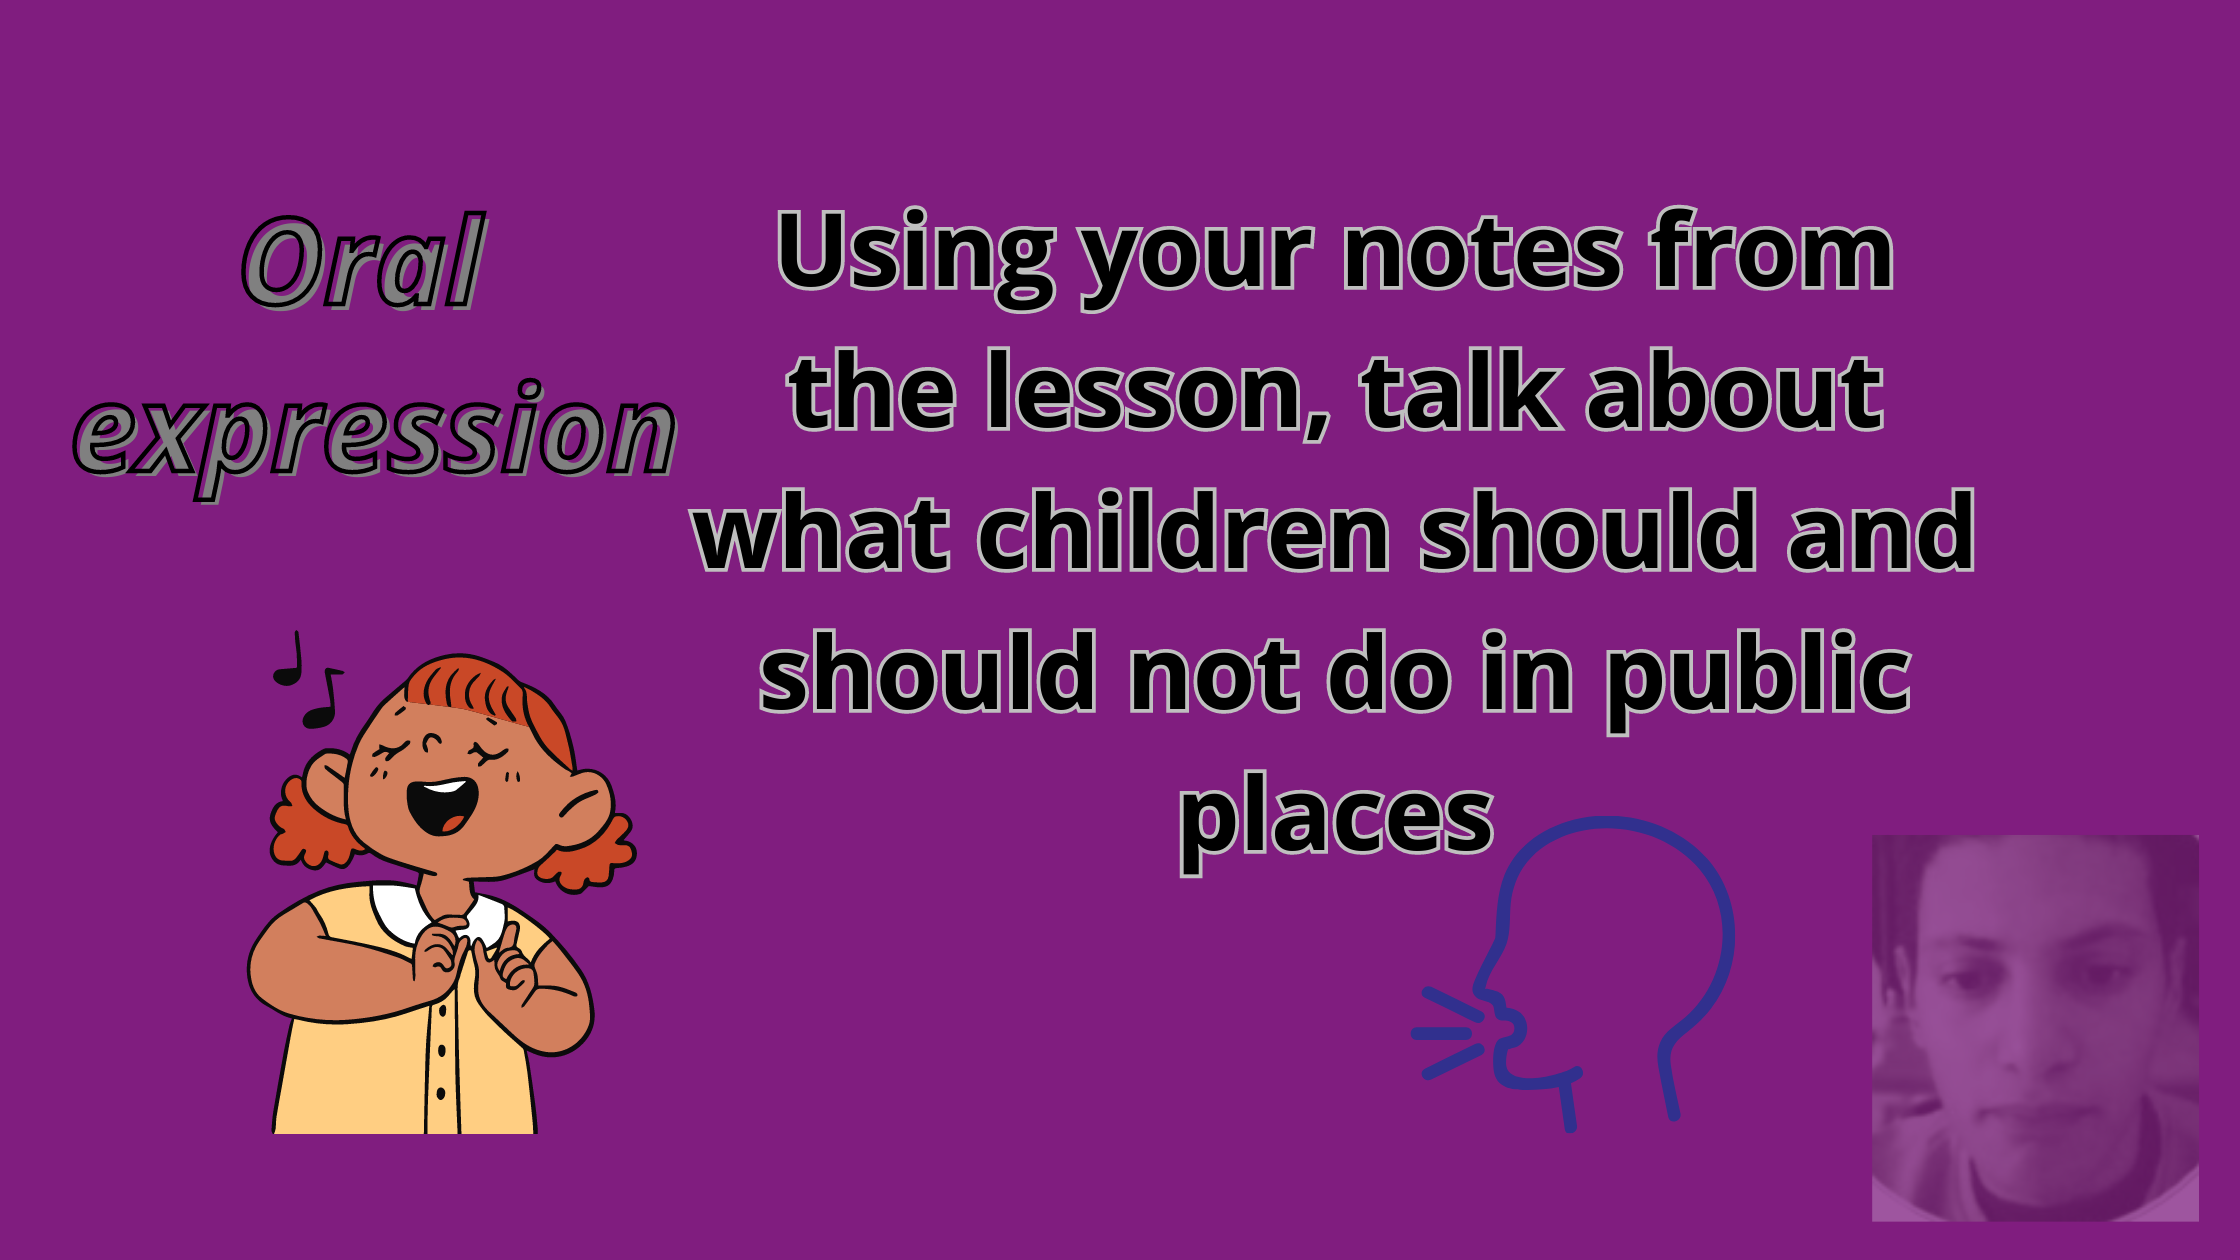 Using your notes from the lesson, talk about what children should and should not do in public places.